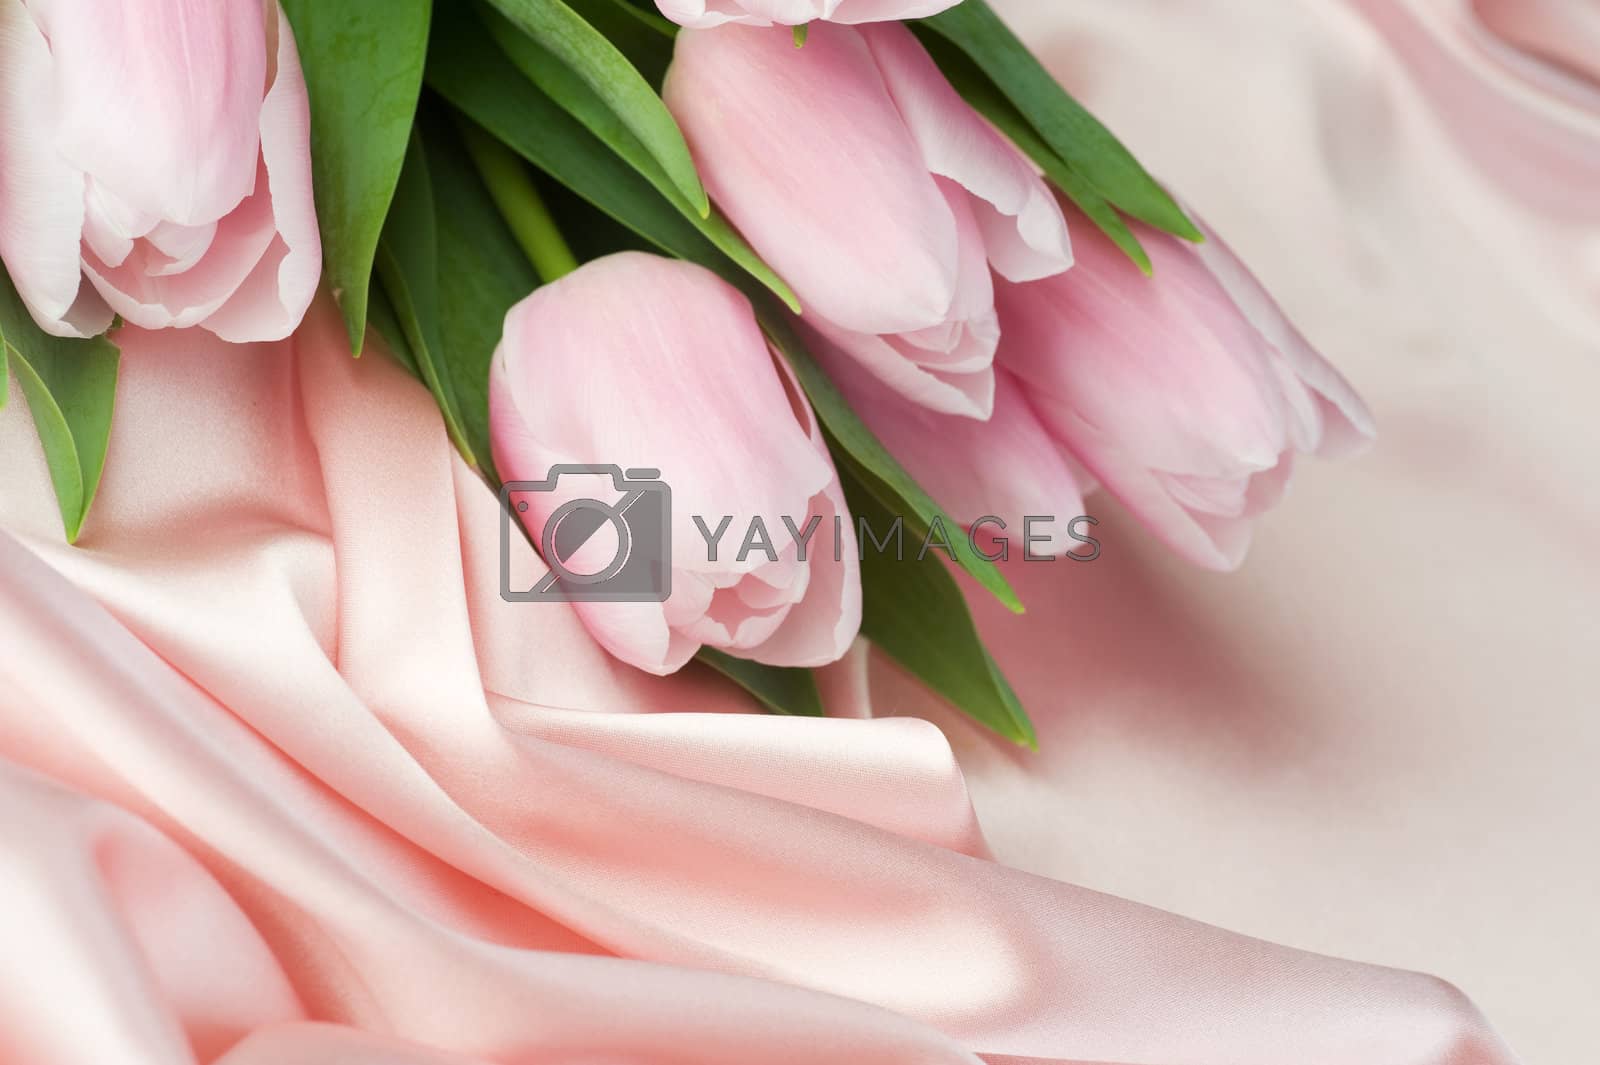 Royalty free image of Tulips On Silk by SubbotinaA